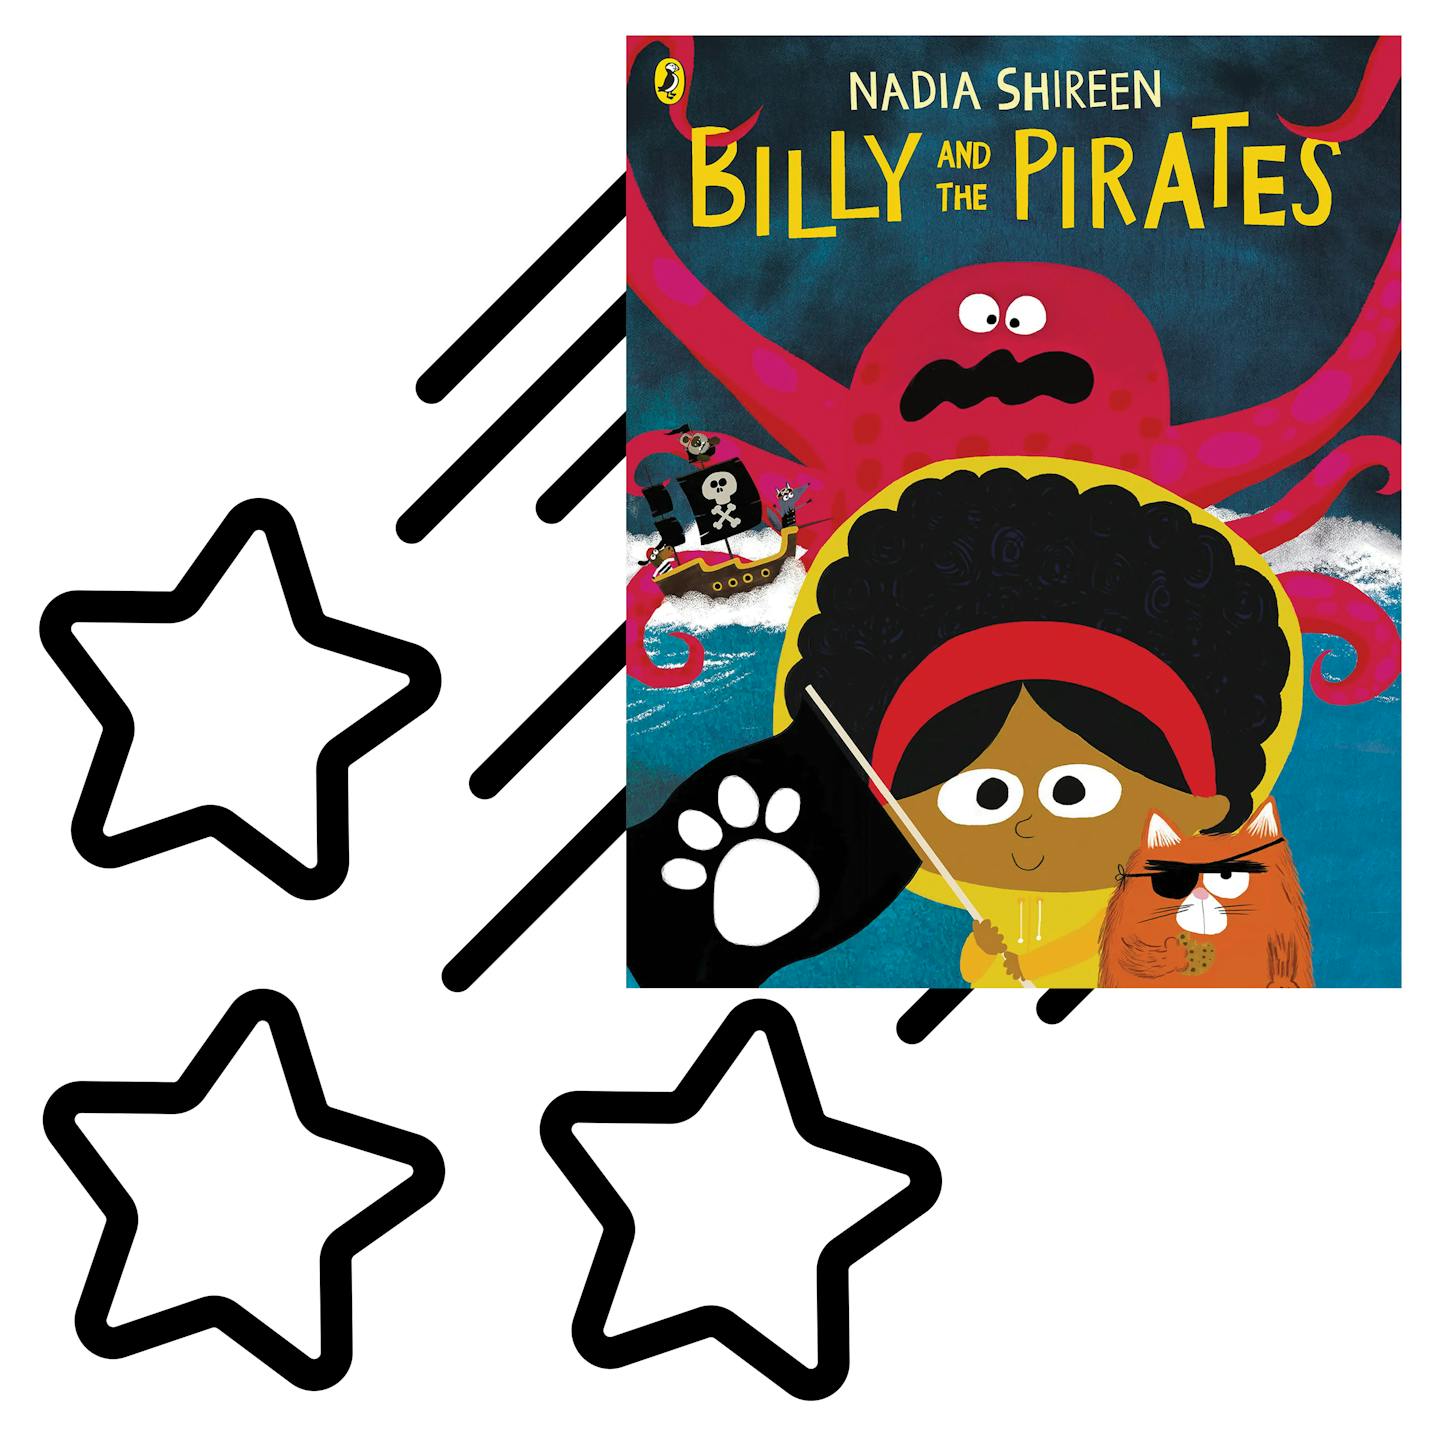 The cover of \nBilly and the Pirates \nis shown superimposed on a graphic illustration of shooting stars in black and white.